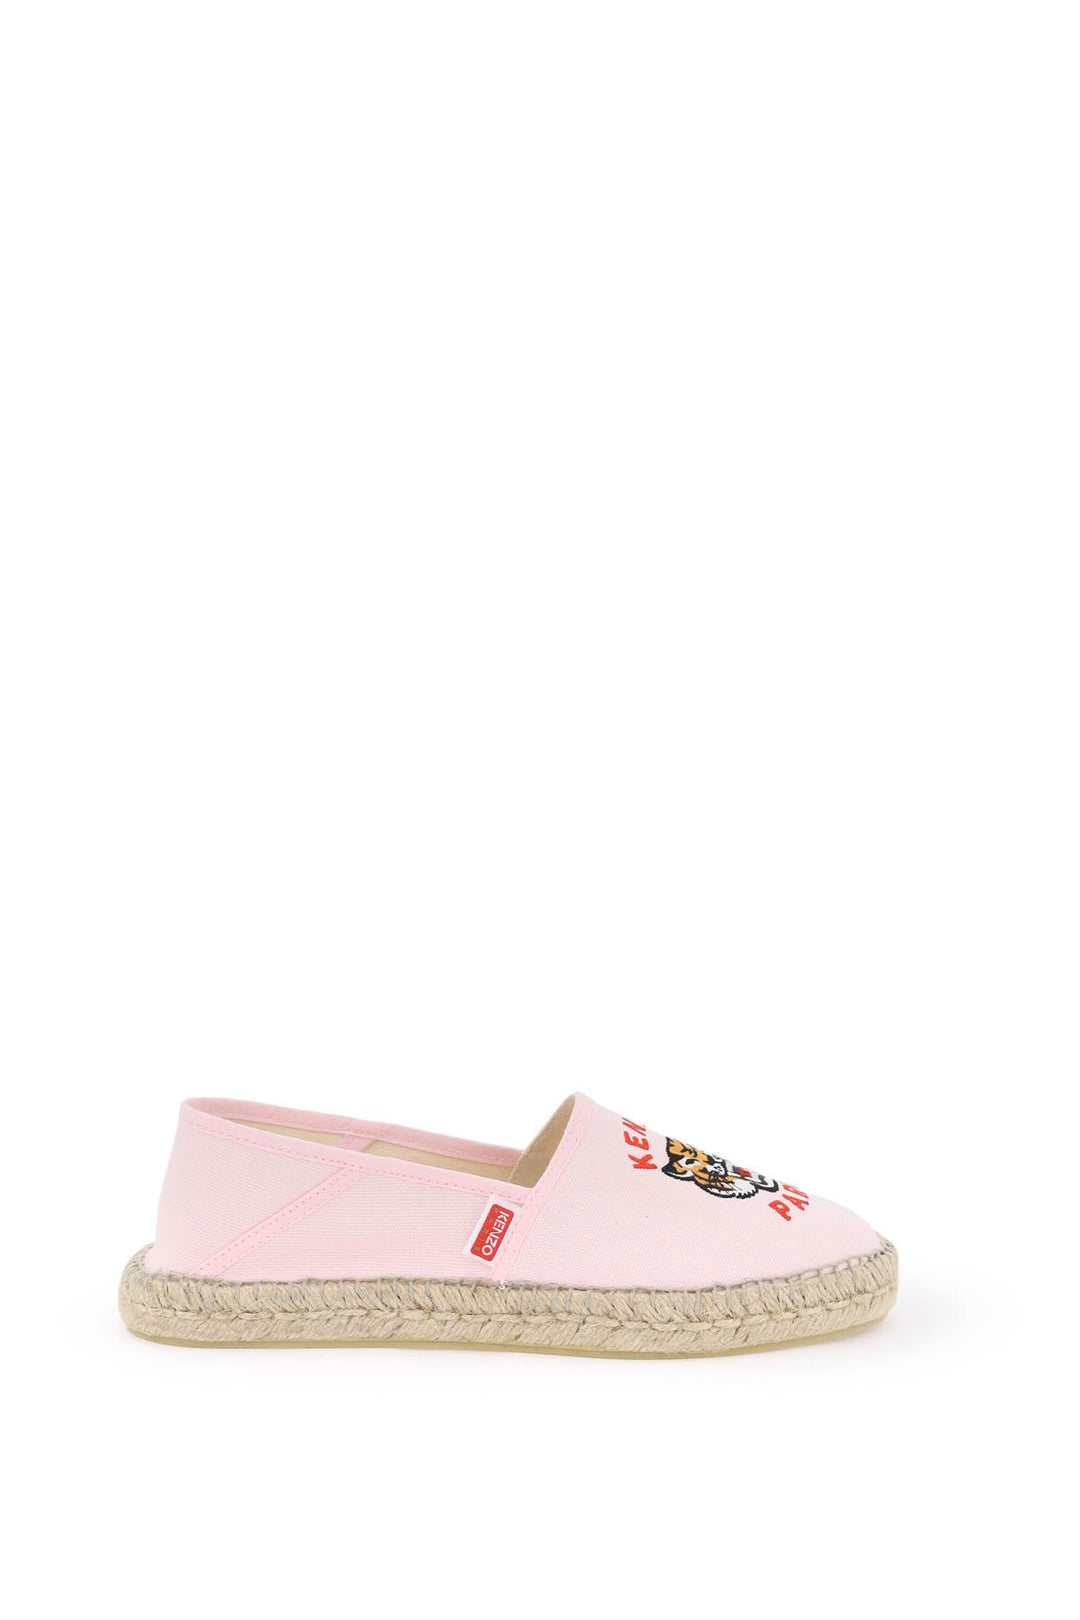 Kenzo Canvas Espadrilles With Logo Embroidery   Rosa